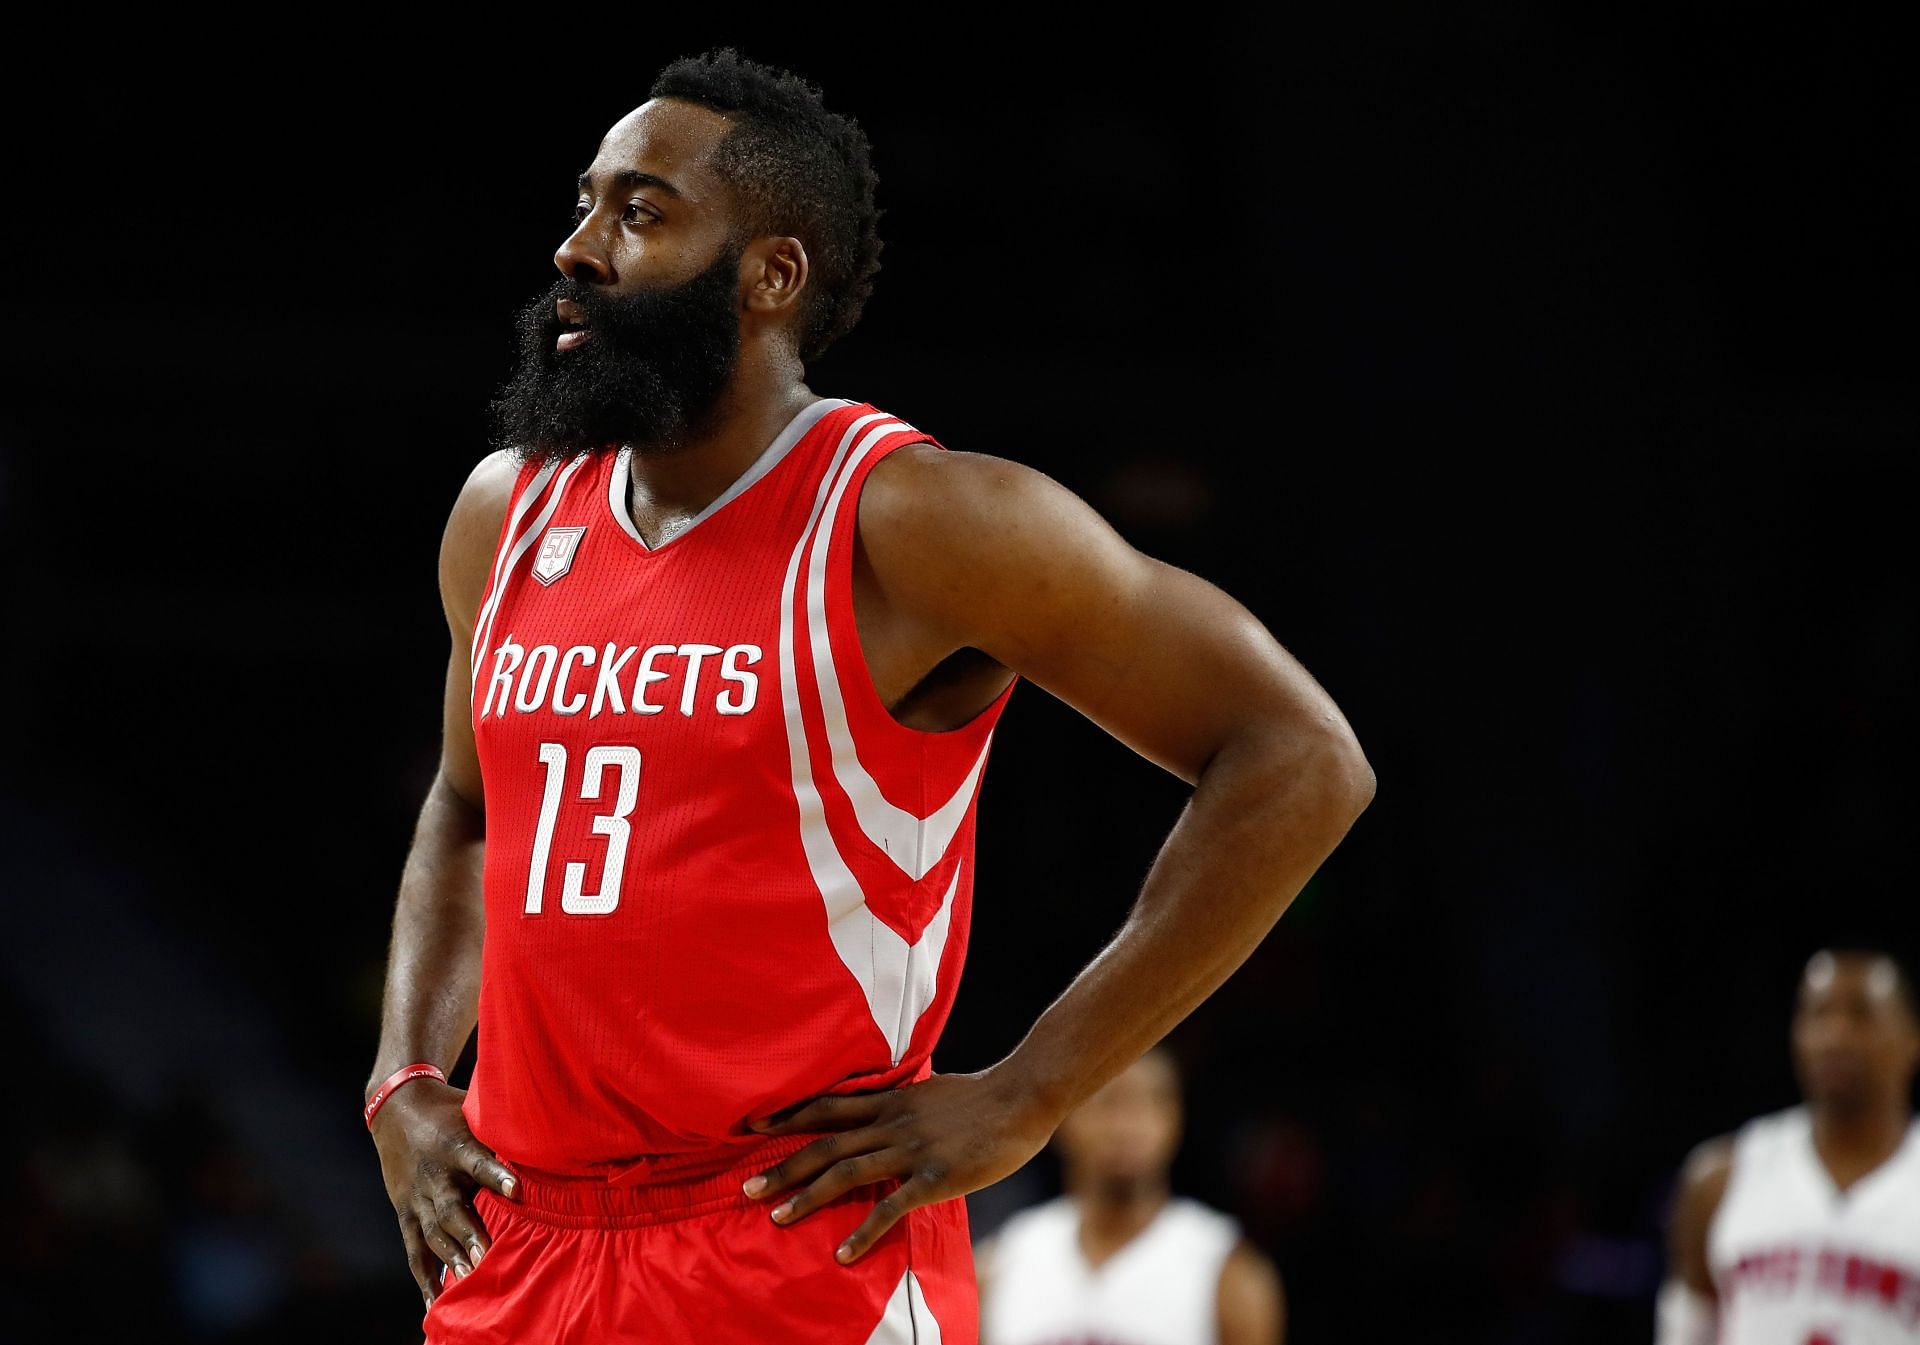 James Harden (#13) of the Houston Rockets looks on while playing the Detroit Pistons.